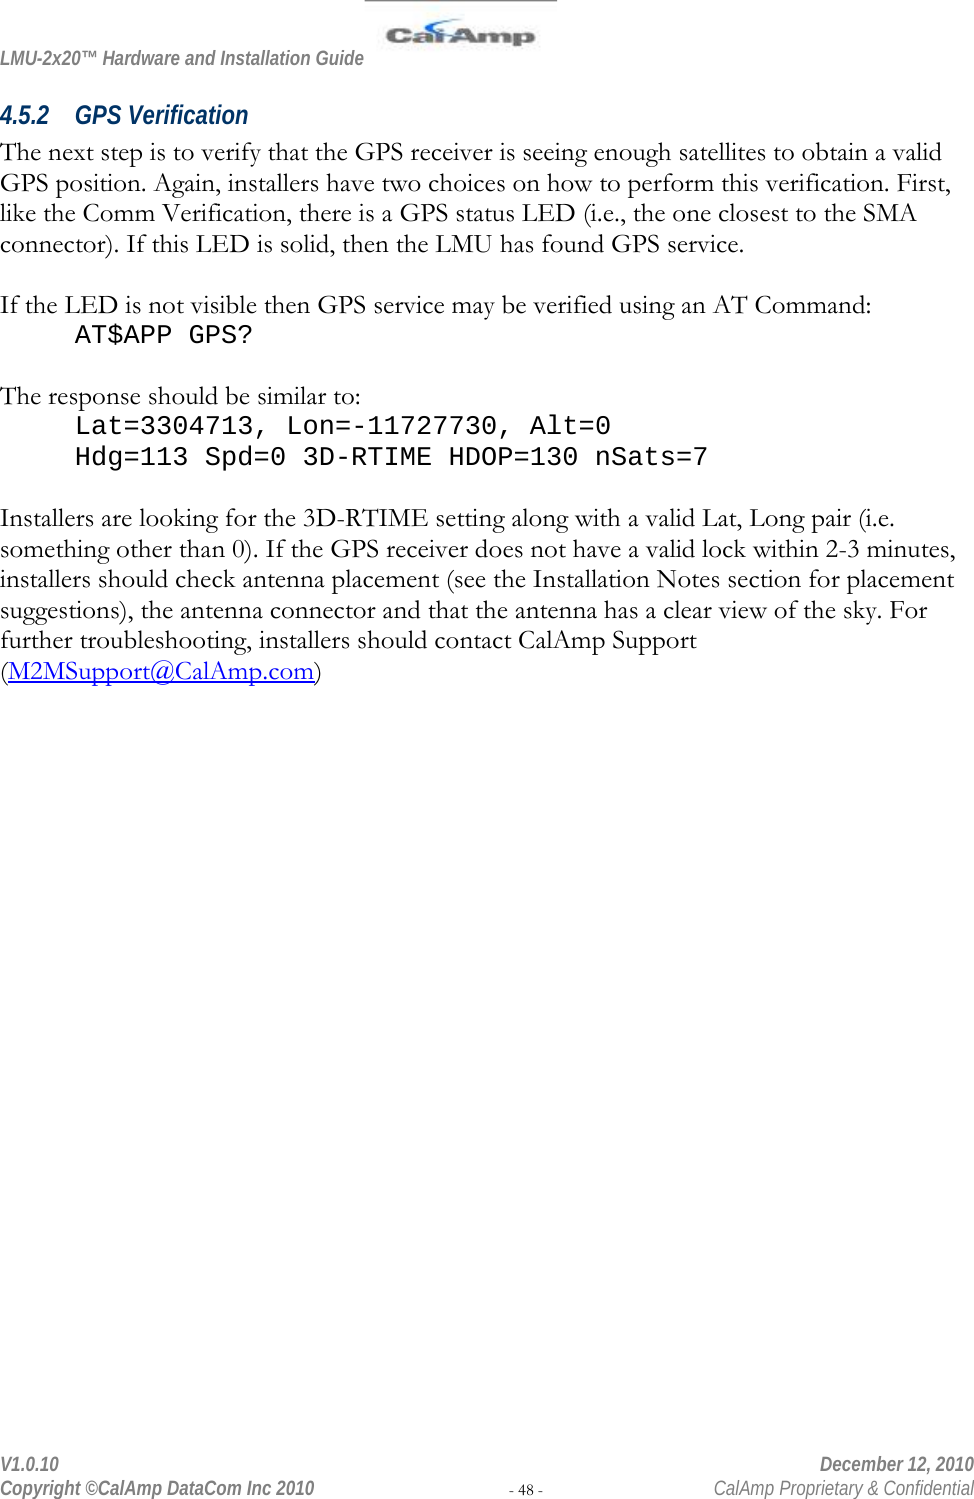 LMU-2x20™ Hardware and Installation Guide  V1.0.10    December 12, 2010 Copyright ©CalAmp DataCom Inc 2010 - 48 -  CalAmp Proprietary &amp; Confidential 4.5.2 GPS Verification The next step is to verify that the GPS receiver is seeing enough satellites to obtain a valid GPS position. Again, installers have two choices on how to perform this verification. First, like the Comm Verification, there is a GPS status LED (i.e., the one closest to the SMA connector). If this LED is solid, then the LMU has found GPS service.   If the LED is not visible then GPS service may be verified using an AT Command: AT$APP GPS?  The response should be similar to: Lat=3304713, Lon=-11727730, Alt=0 Hdg=113 Spd=0 3D-RTIME HDOP=130 nSats=7  Installers are looking for the 3D-RTIME setting along with a valid Lat, Long pair (i.e. something other than 0). If the GPS receiver does not have a valid lock within 2-3 minutes, installers should check antenna placement (see the Installation Notes section for placement suggestions), the antenna connector and that the antenna has a clear view of the sky. For further troubleshooting, installers should contact CalAmp Support (M2MSupport@CalAmp.com) 